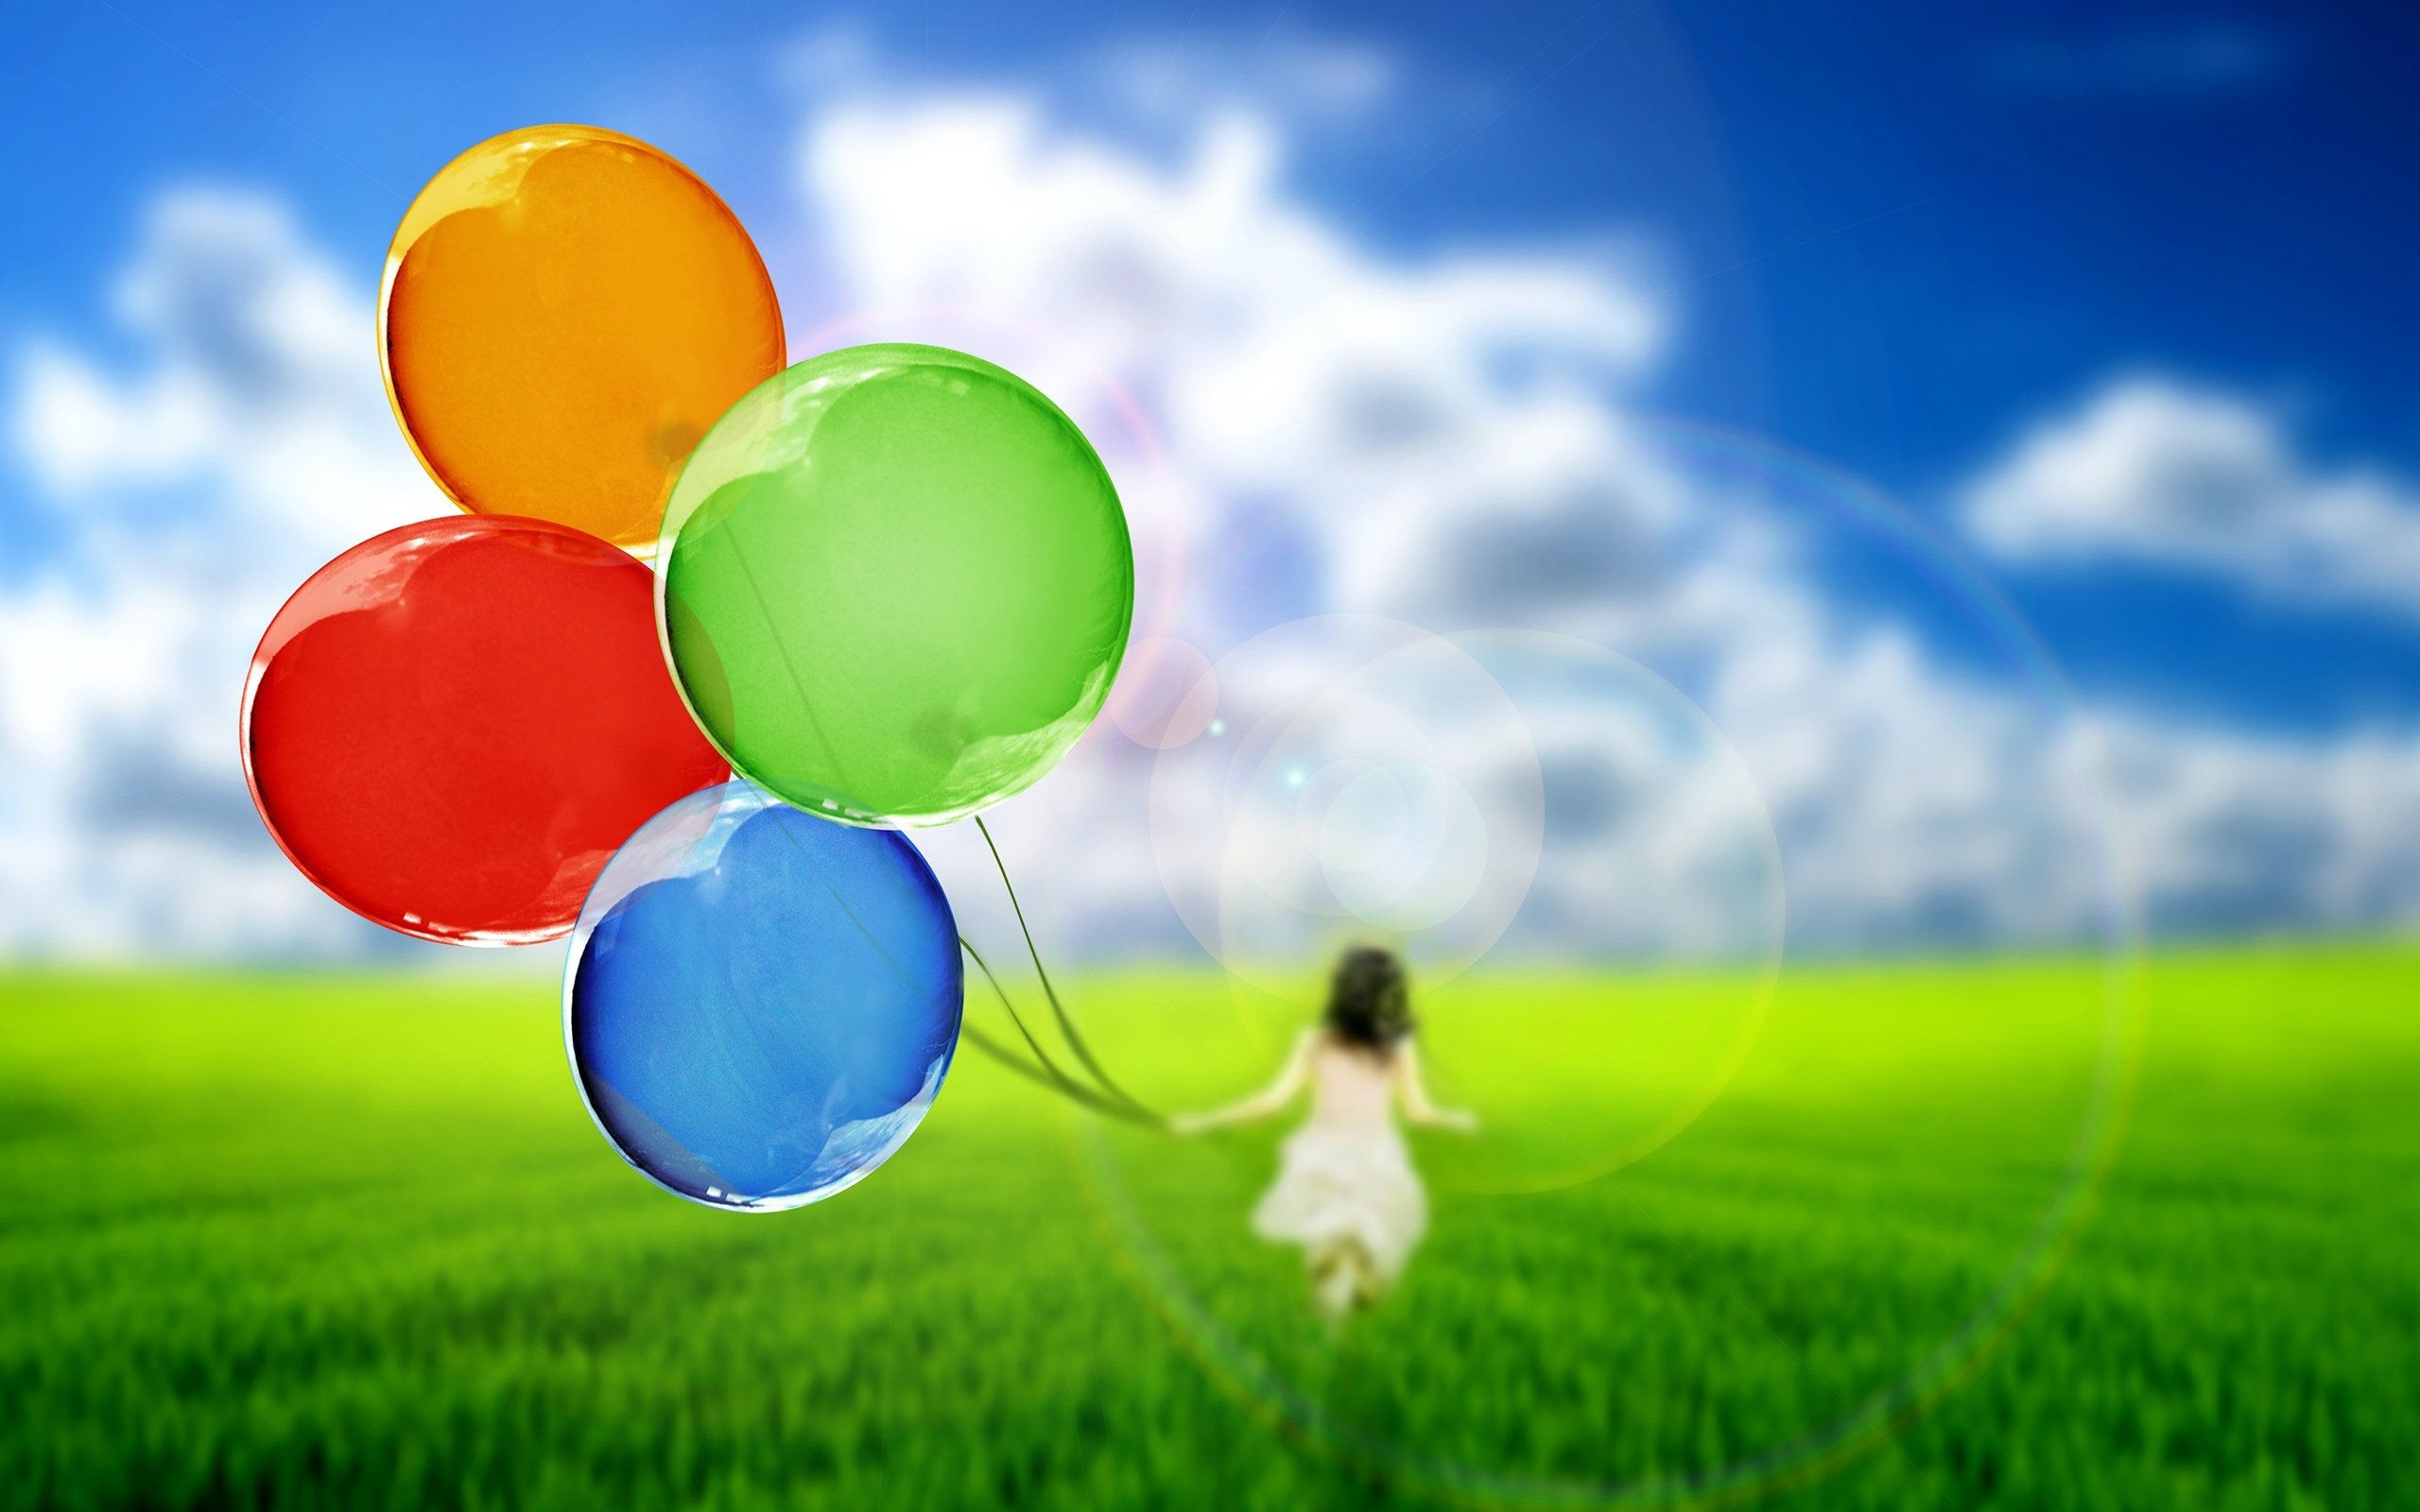 Running girl with colorful balloons wallpaper